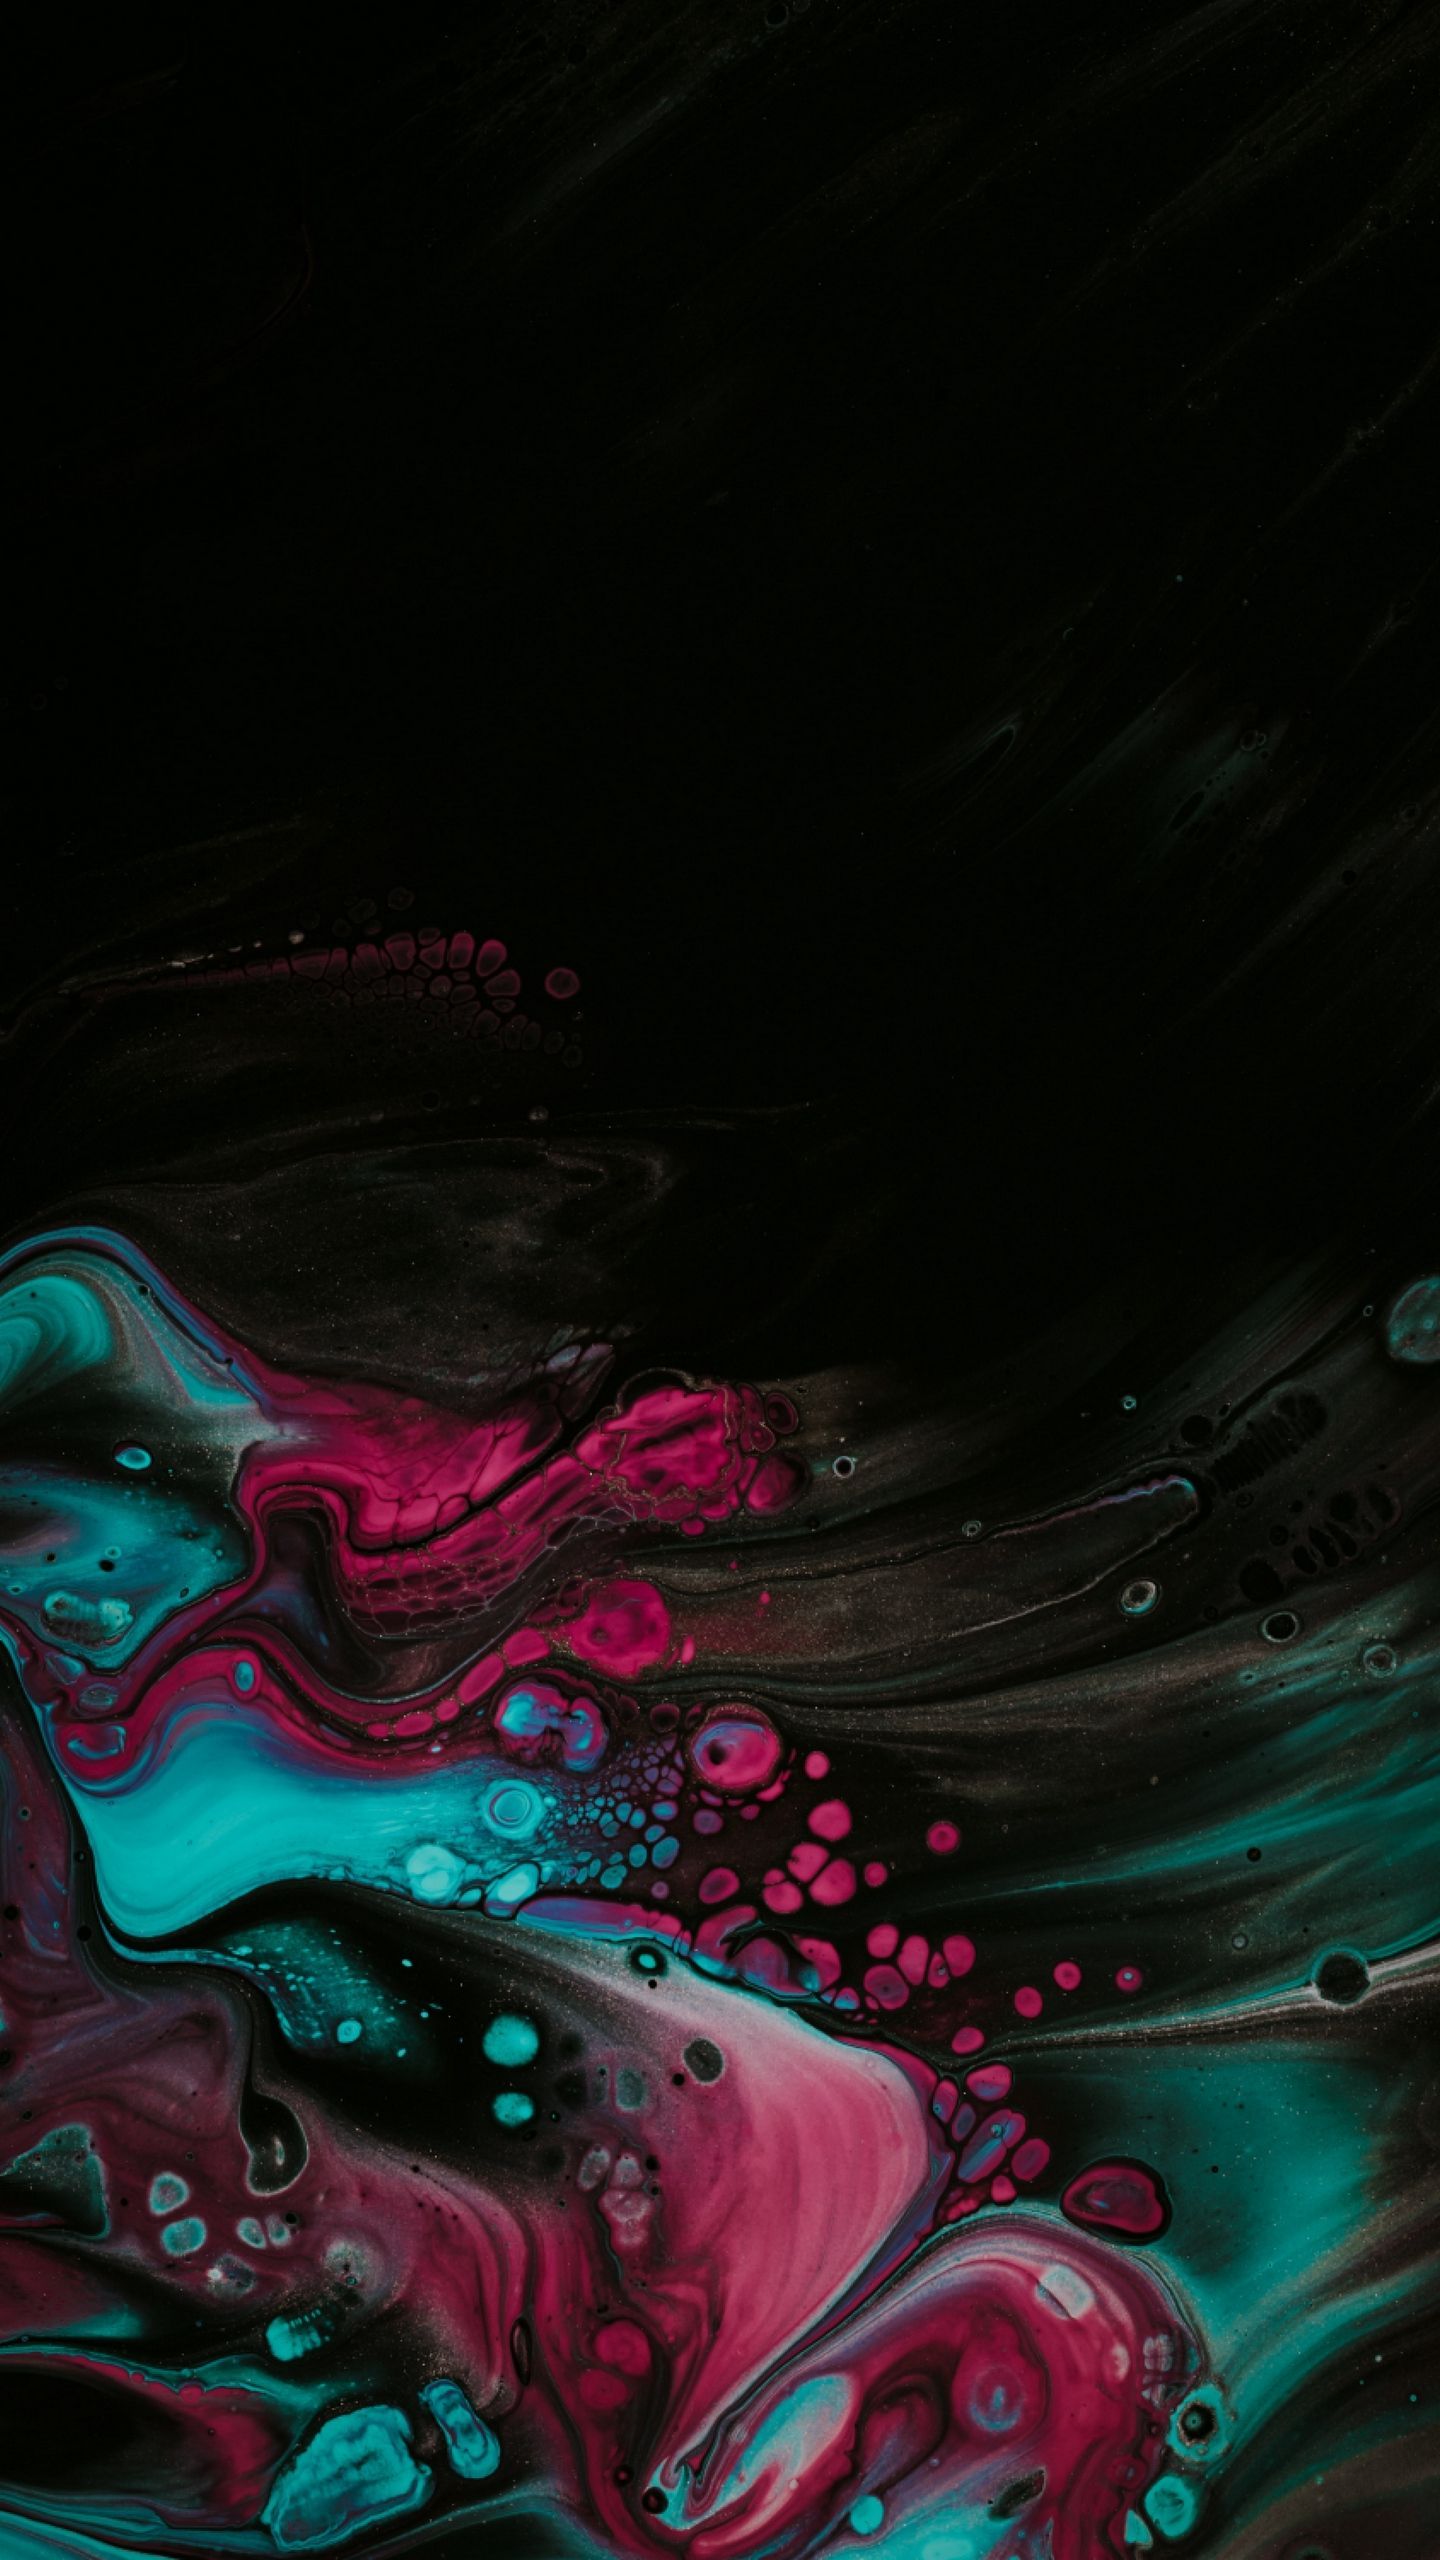 Download wallpaper 1440x2560 paint, spots, stains, mix, liquid, colorful qhd samsung galaxy s s edge, note, lg g4. Dark wallpaper, Graphic wallpaper, Painting